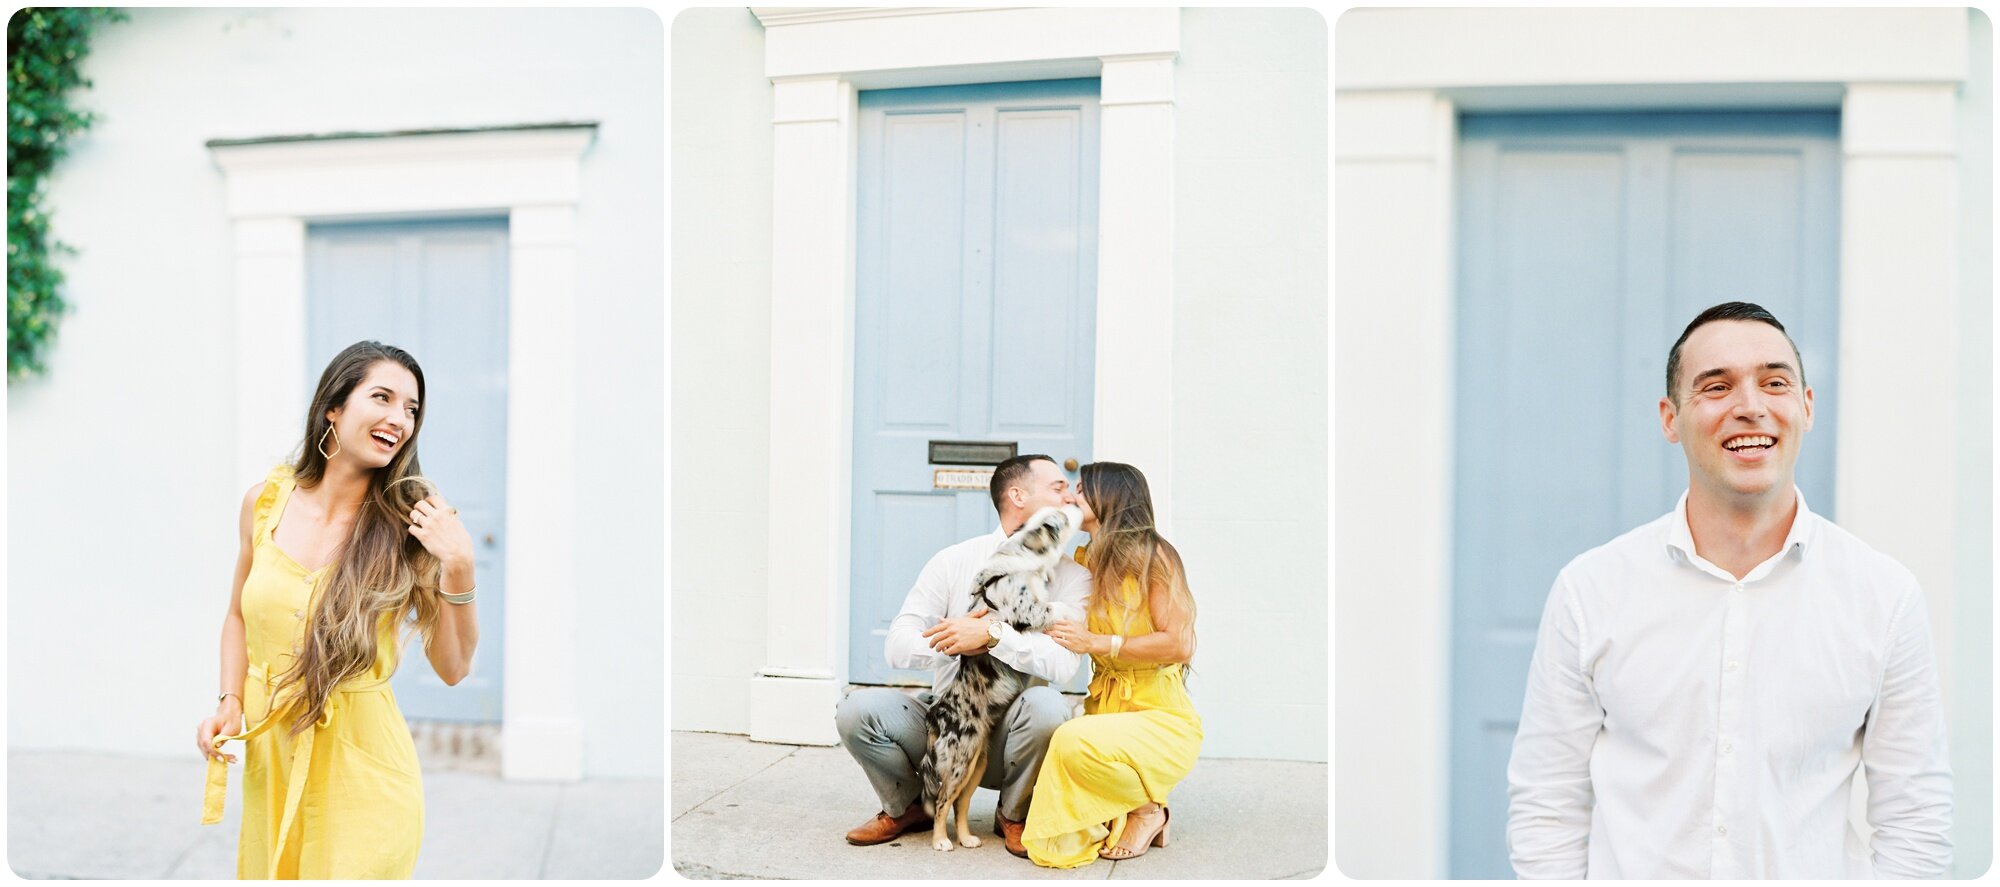 rainbow_row_yellow_blue_outfit_battery_downtown_charleston_engagement_puppy_outdoor_wedding_photographers_husband_wife_team_kailee_tim_kailee_dimeglio_photography_charleston_traveling_photographers_0012.jpg